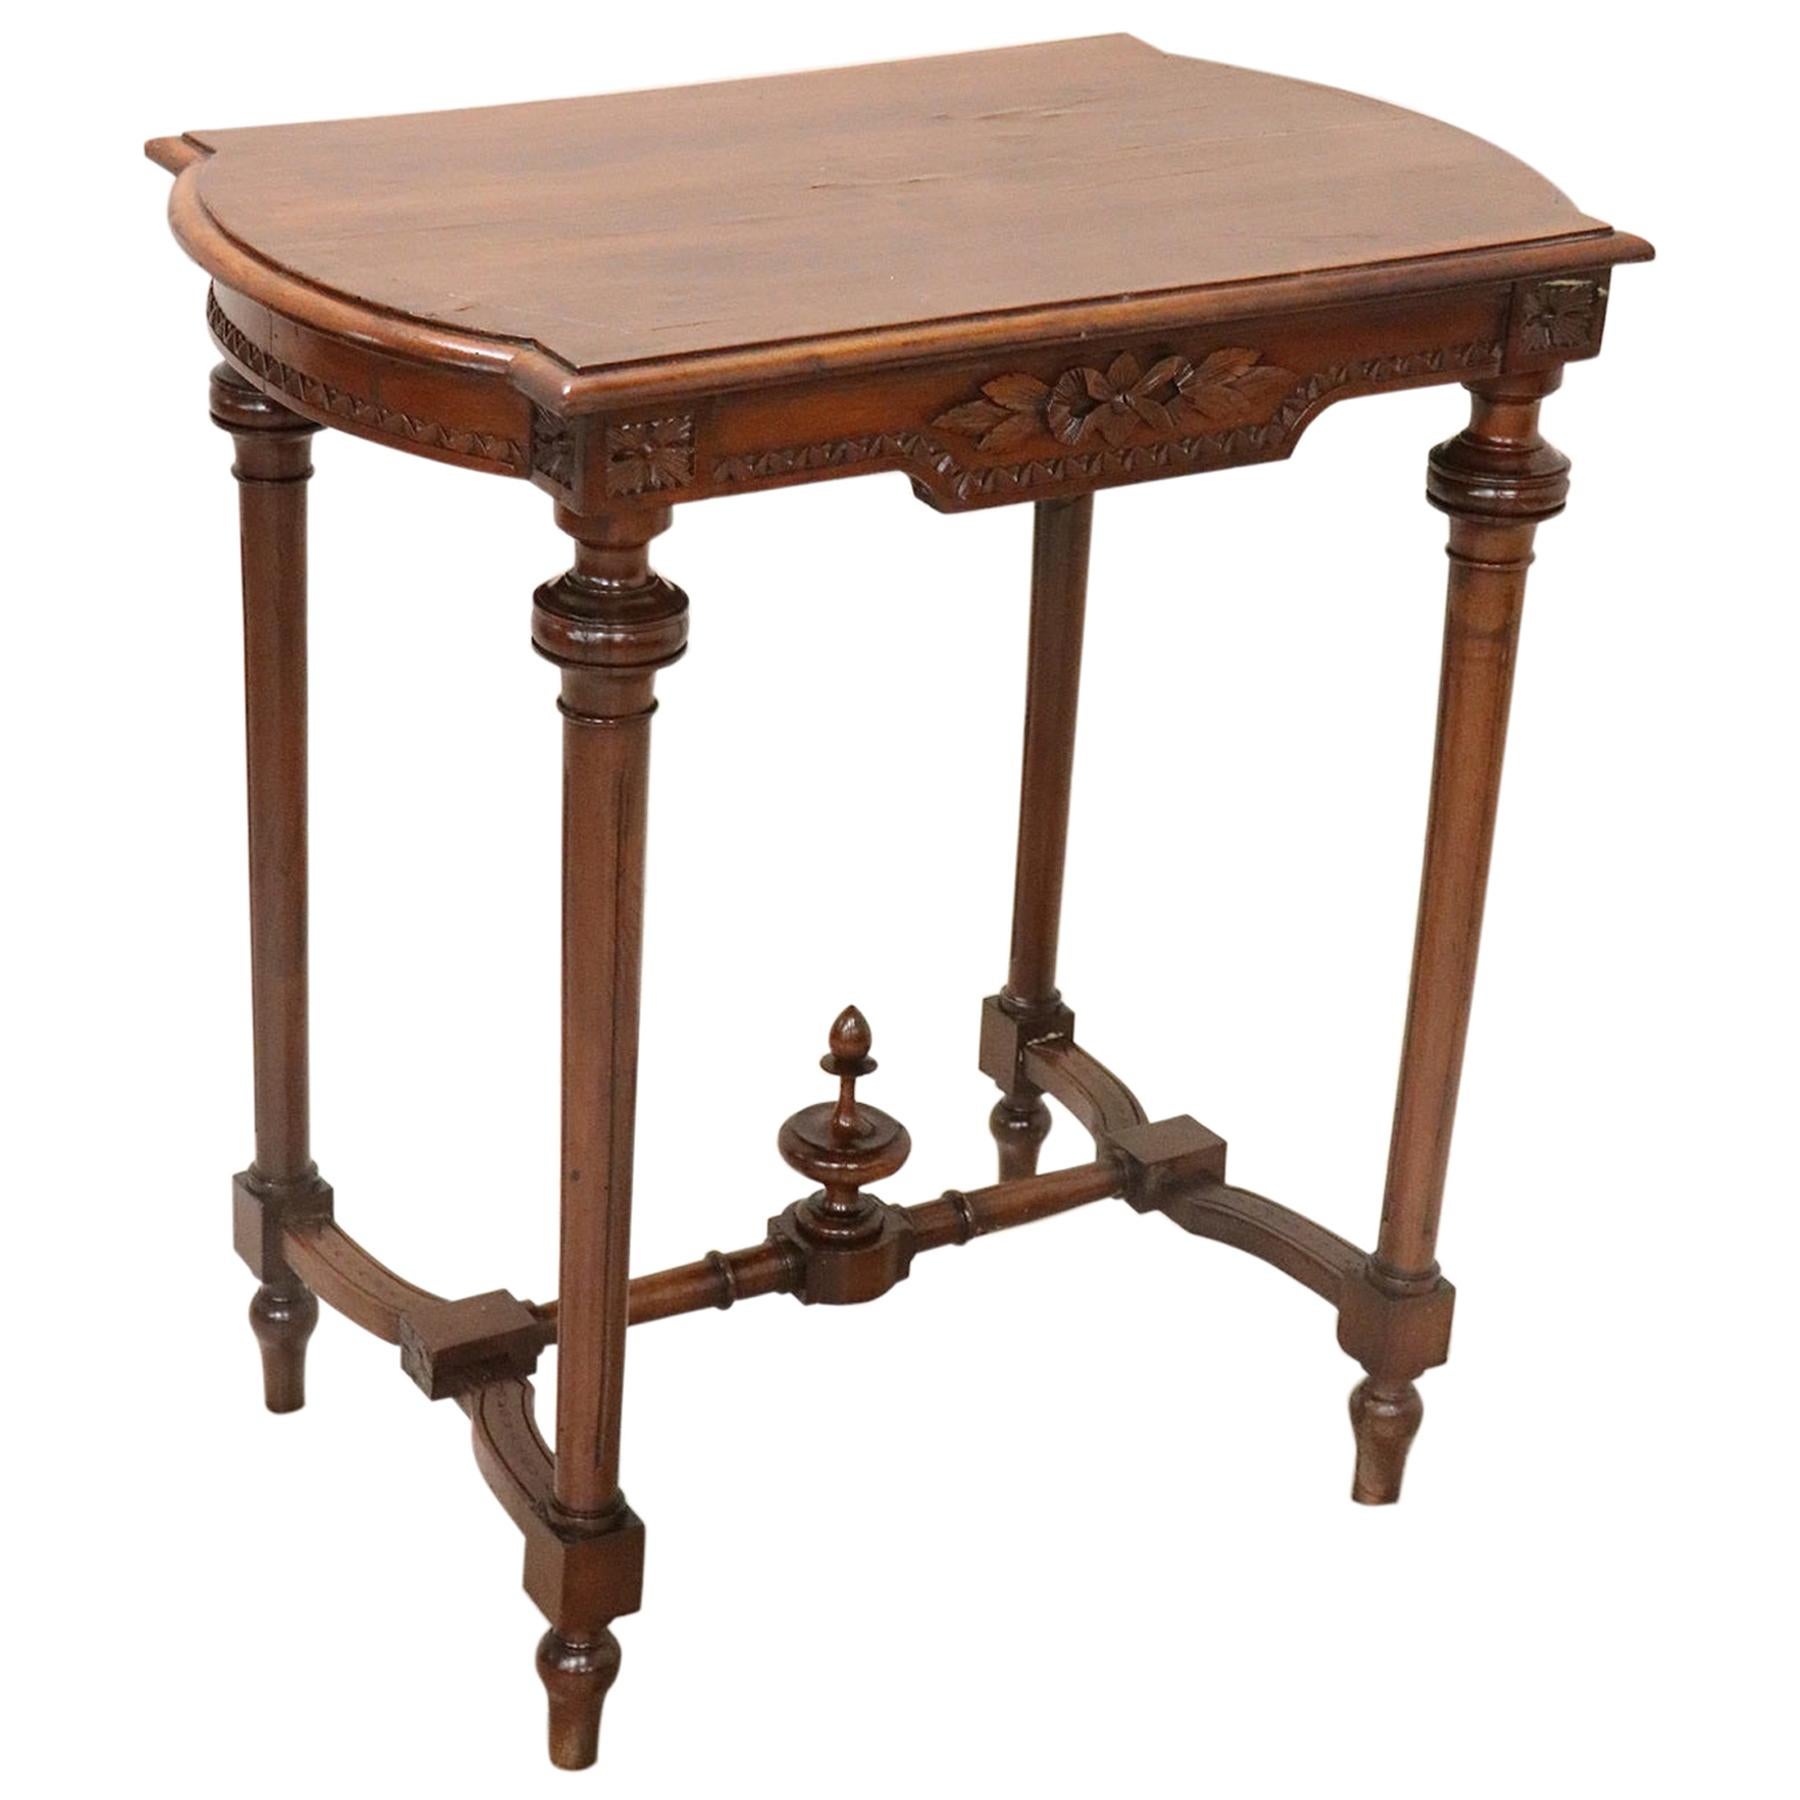 Early 20th Century Italian Carved Walnut Side Table